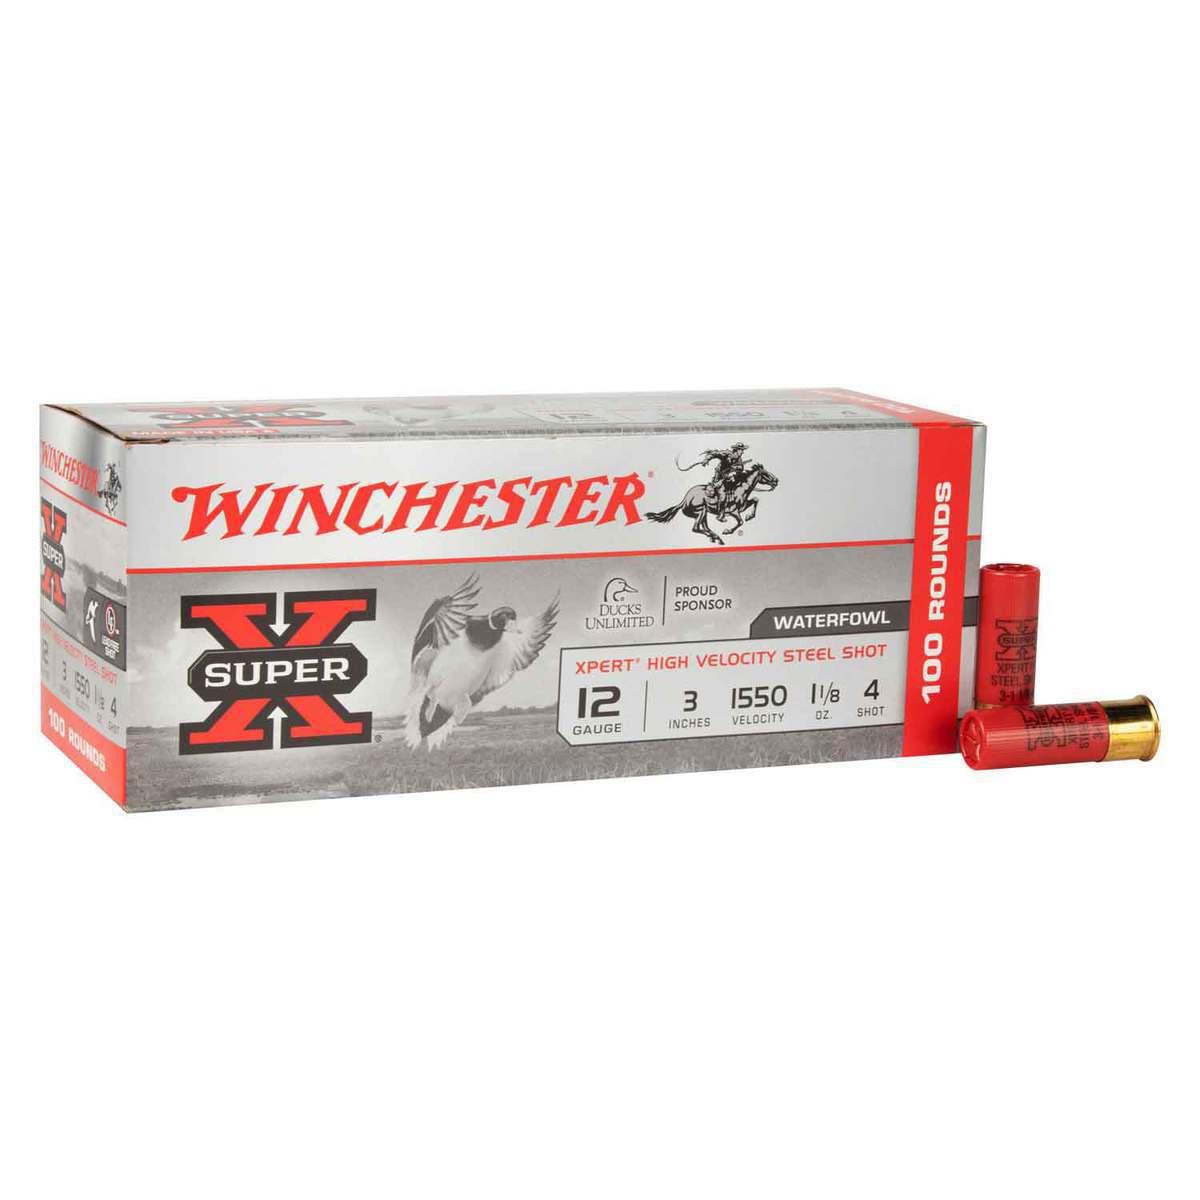 Winchester Super-X Xpert High-Velocity Steel Waterfowl, 12 Gauge, 3, 1 1/8  oz., 25 Rounds - 166792, 12 Gauge Shells at Sportsman's Guide